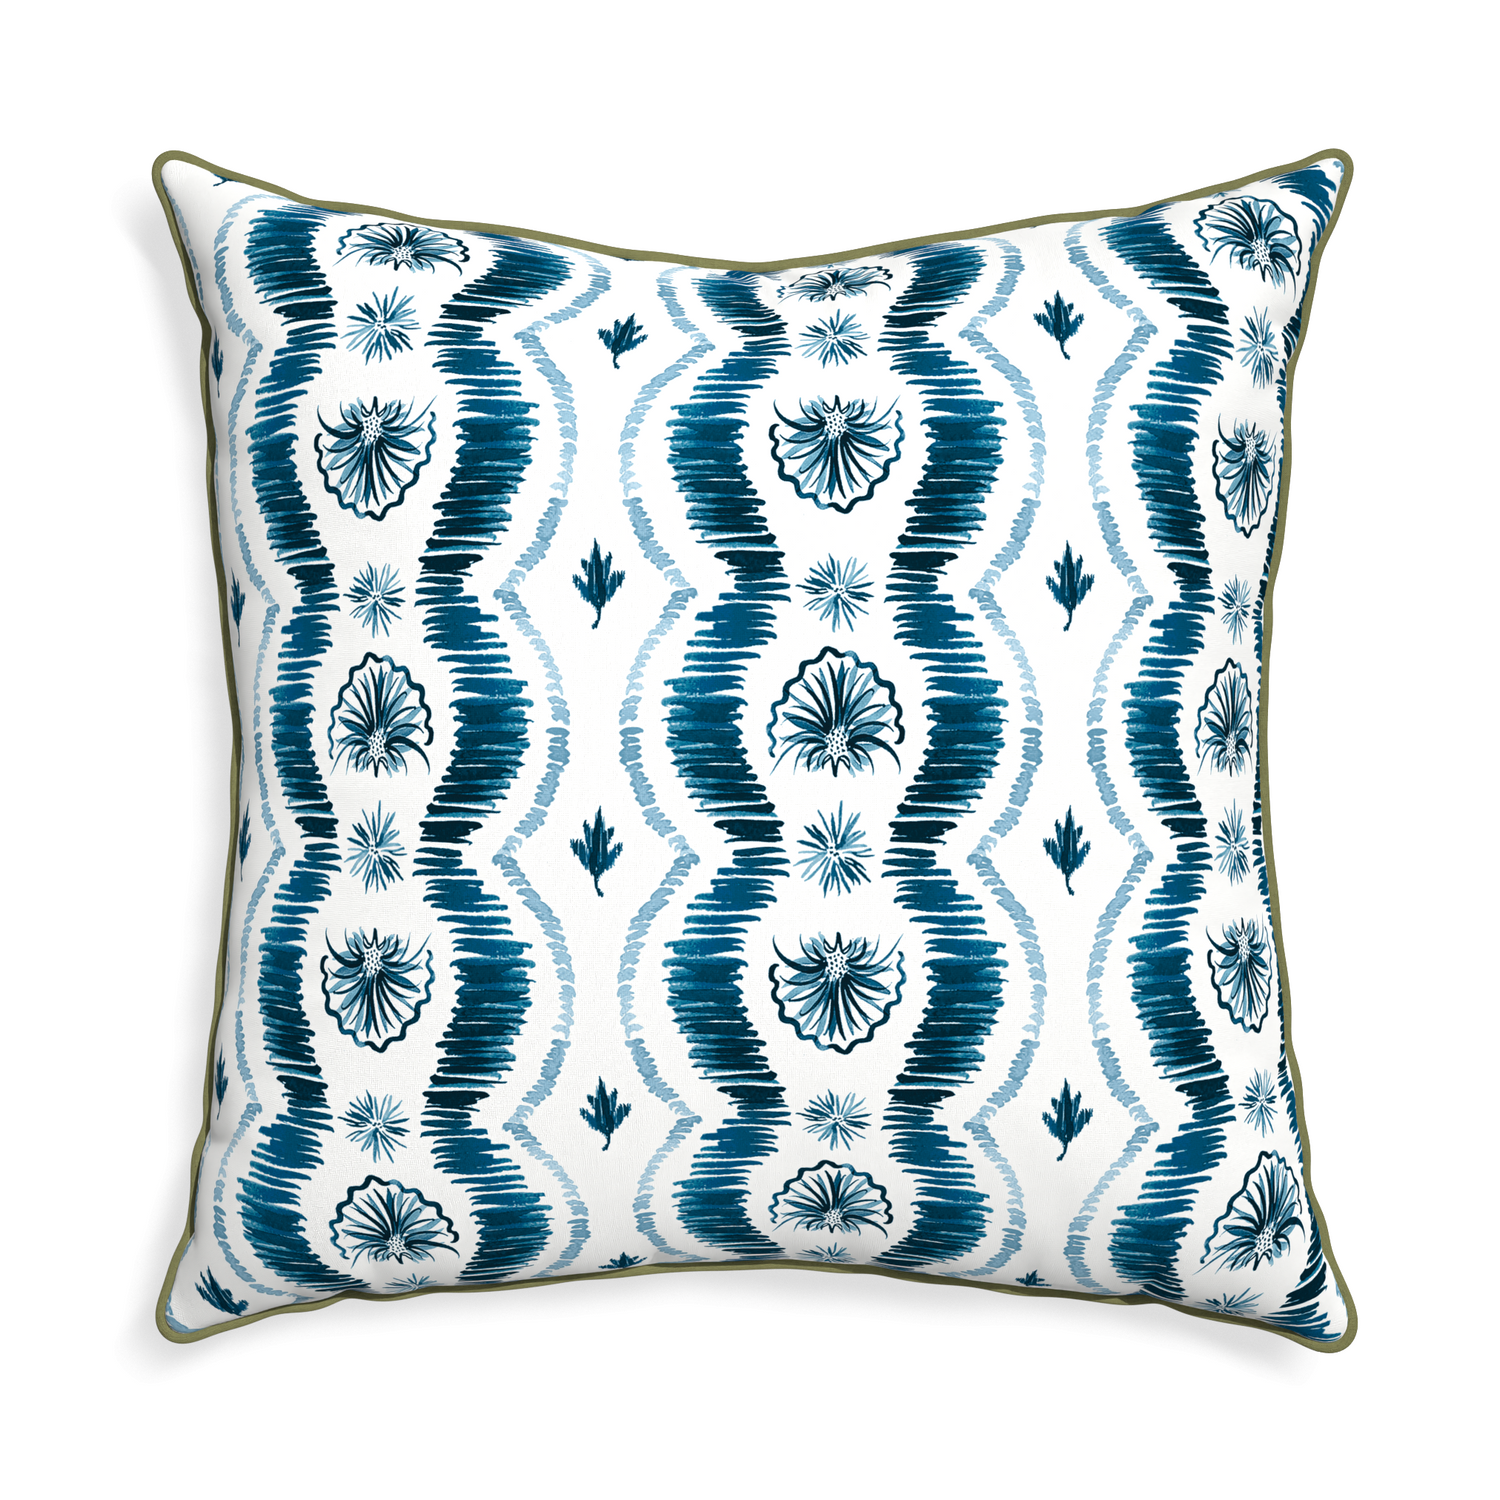 rectangle blue ikat pillow with moss green piping